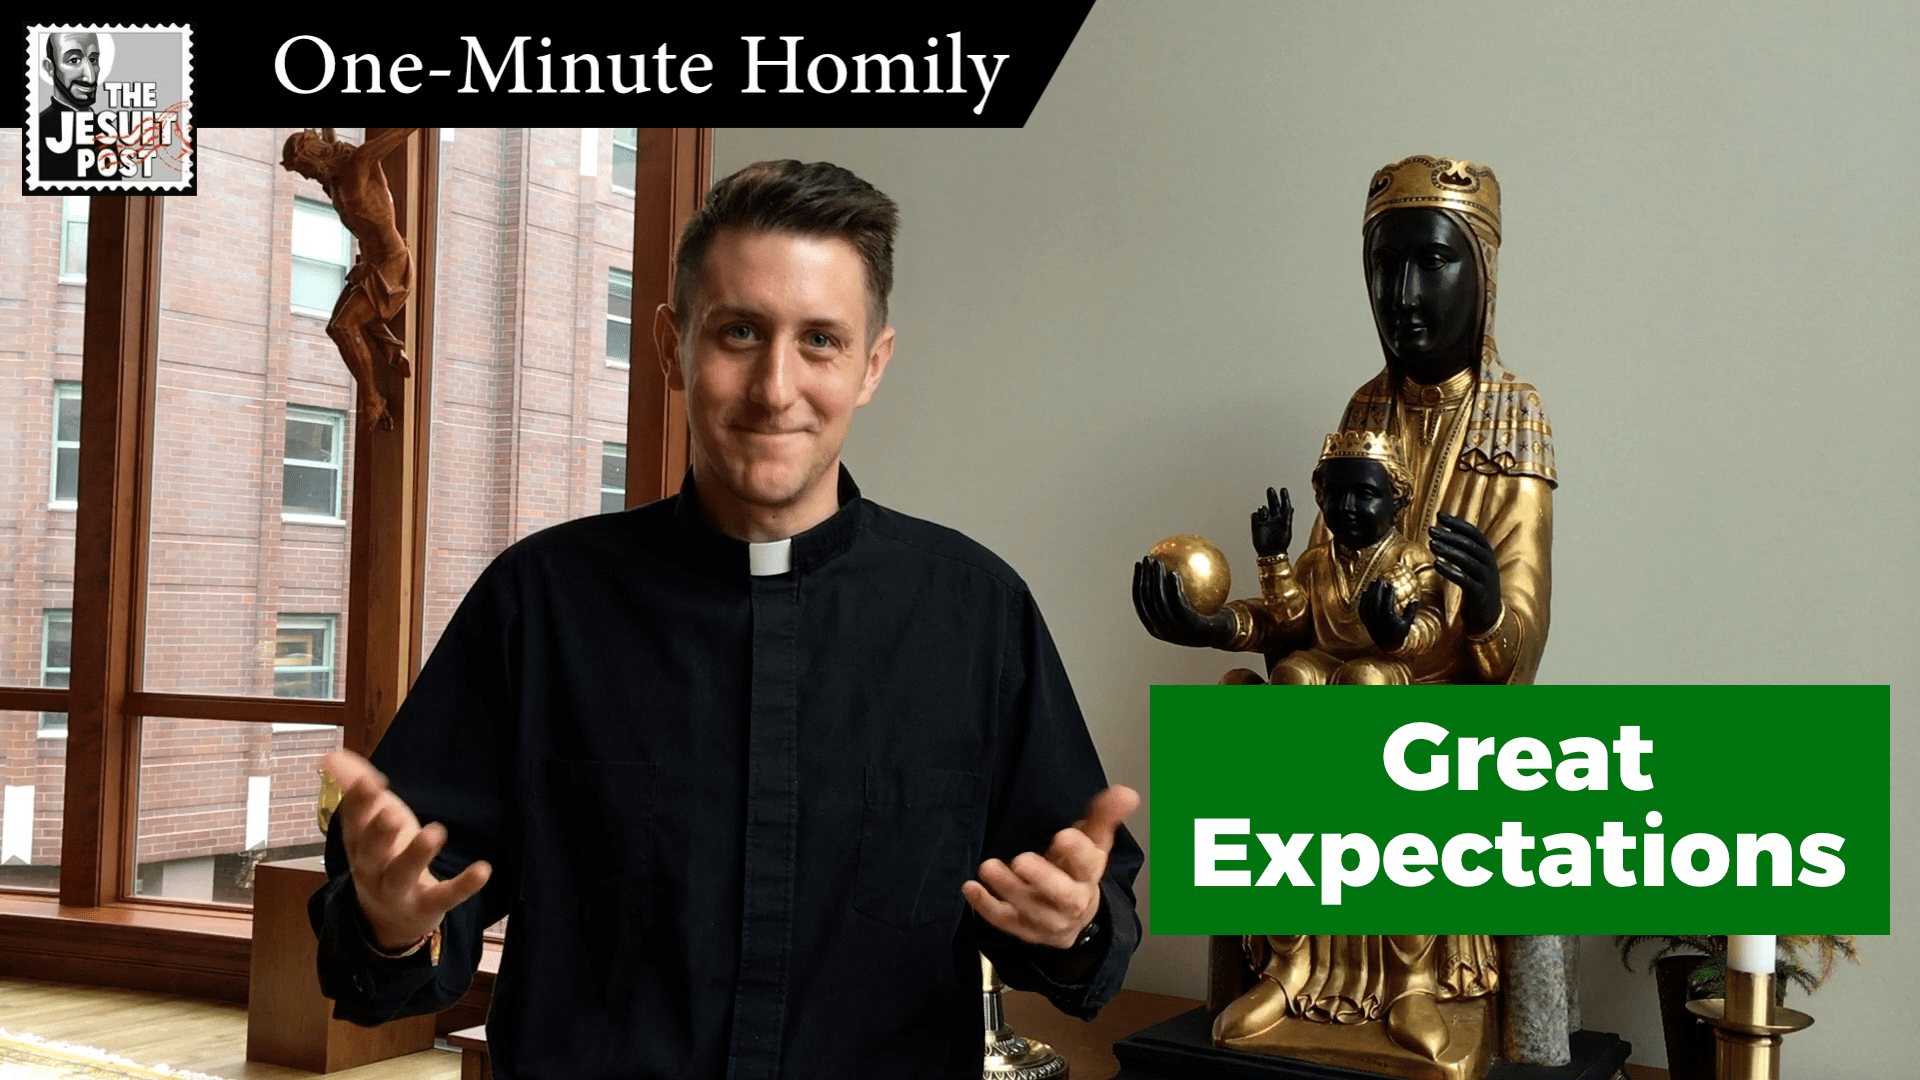 One-Minute Homily: “Great Expectations”